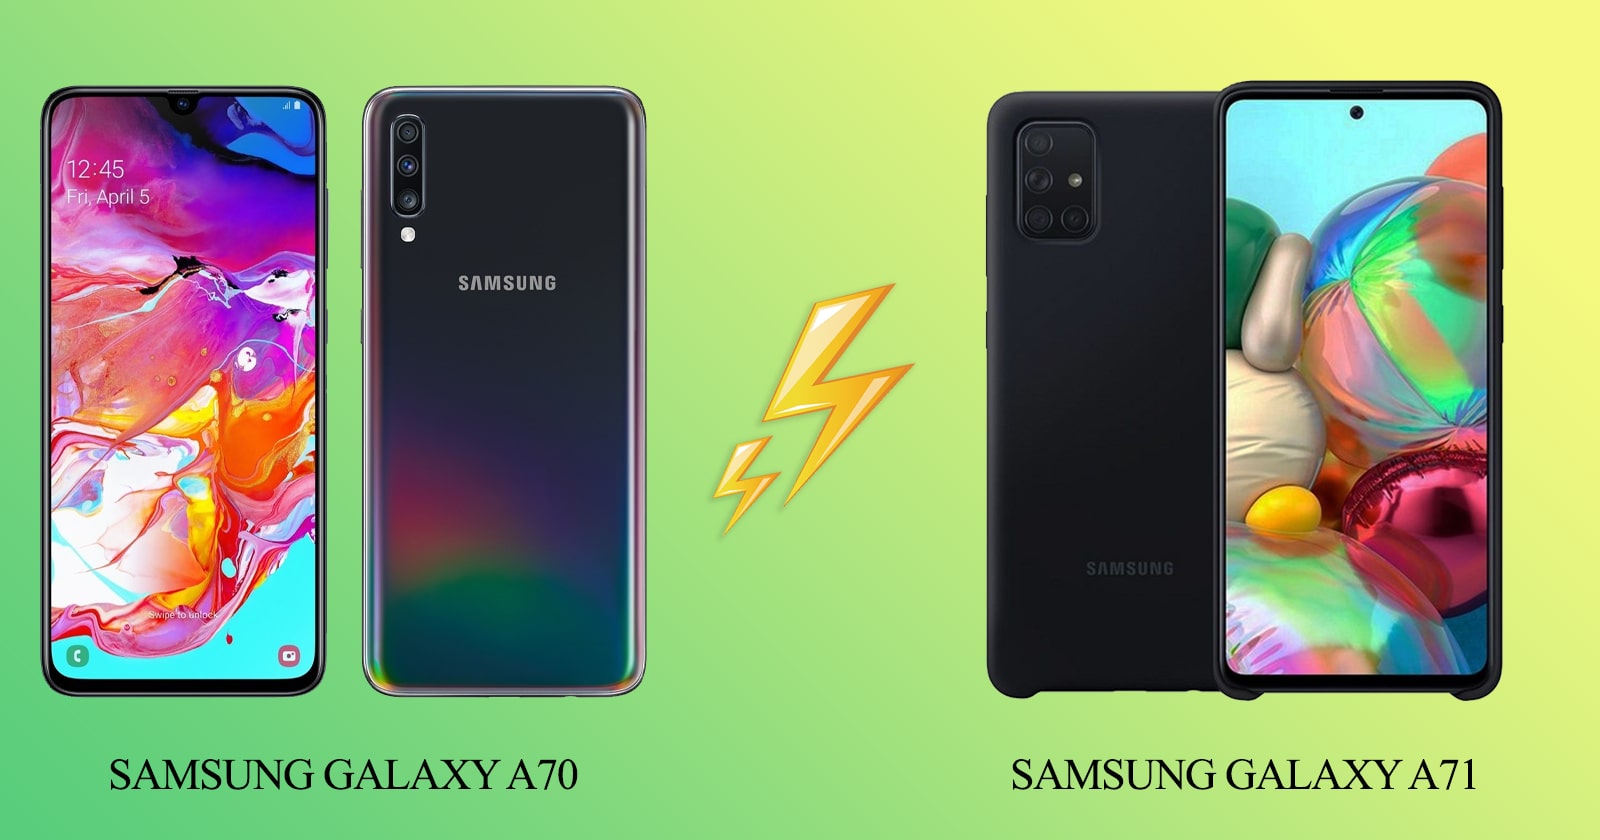 What Is the Difference Between Samsung Galaxy A70 and A71